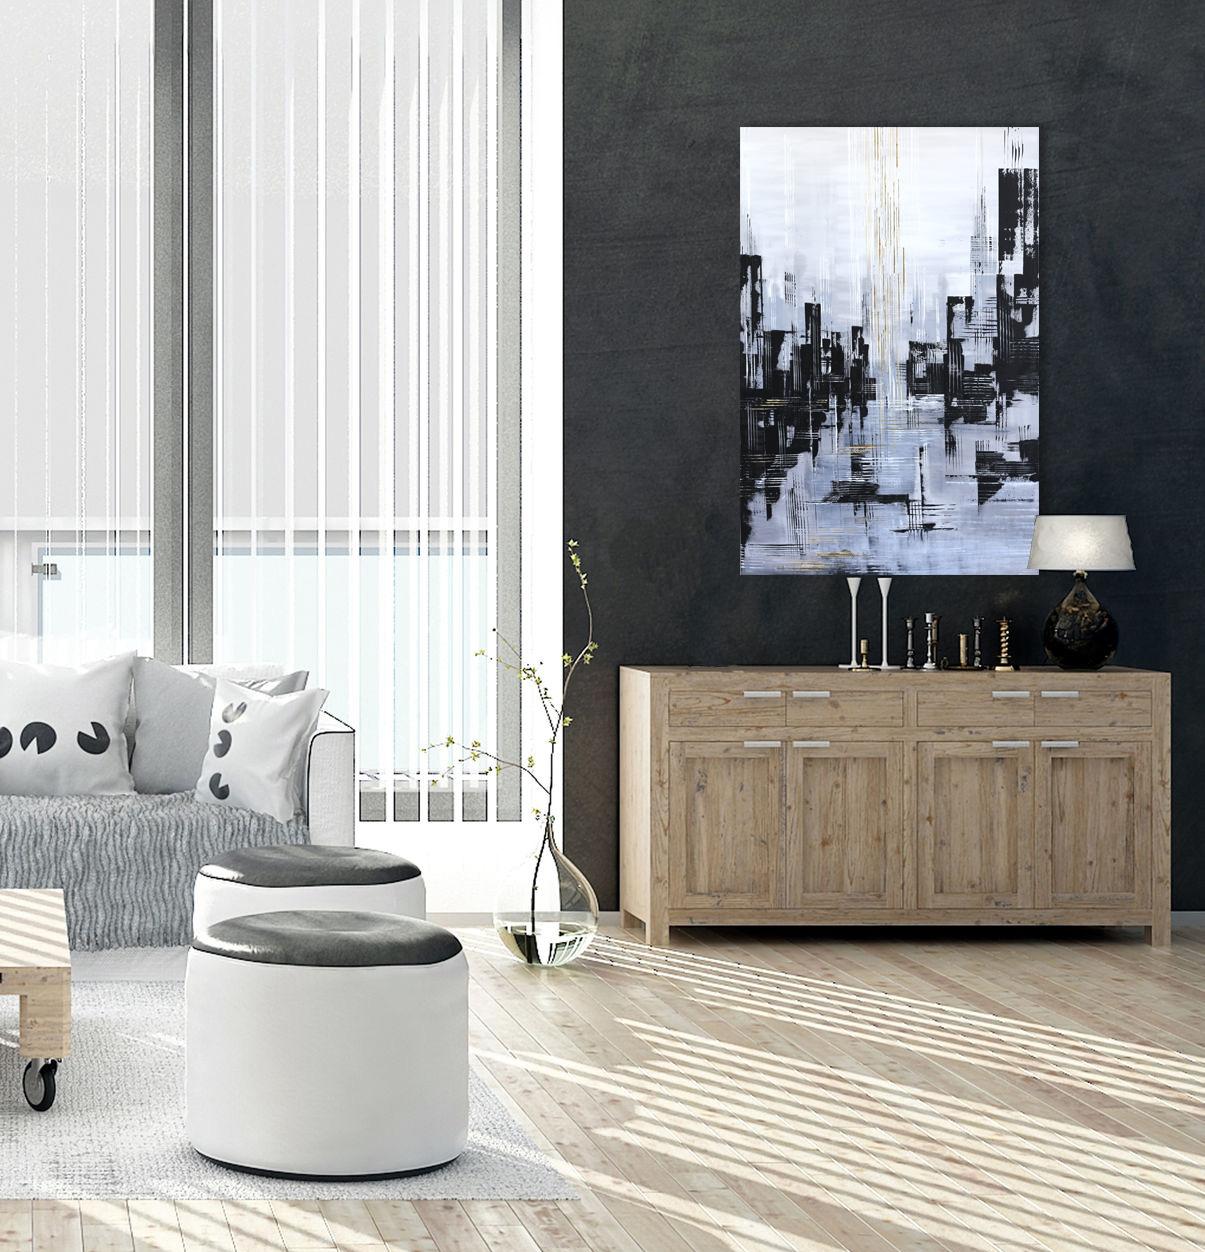 Black and White World - Painting by Ivana Milosevic